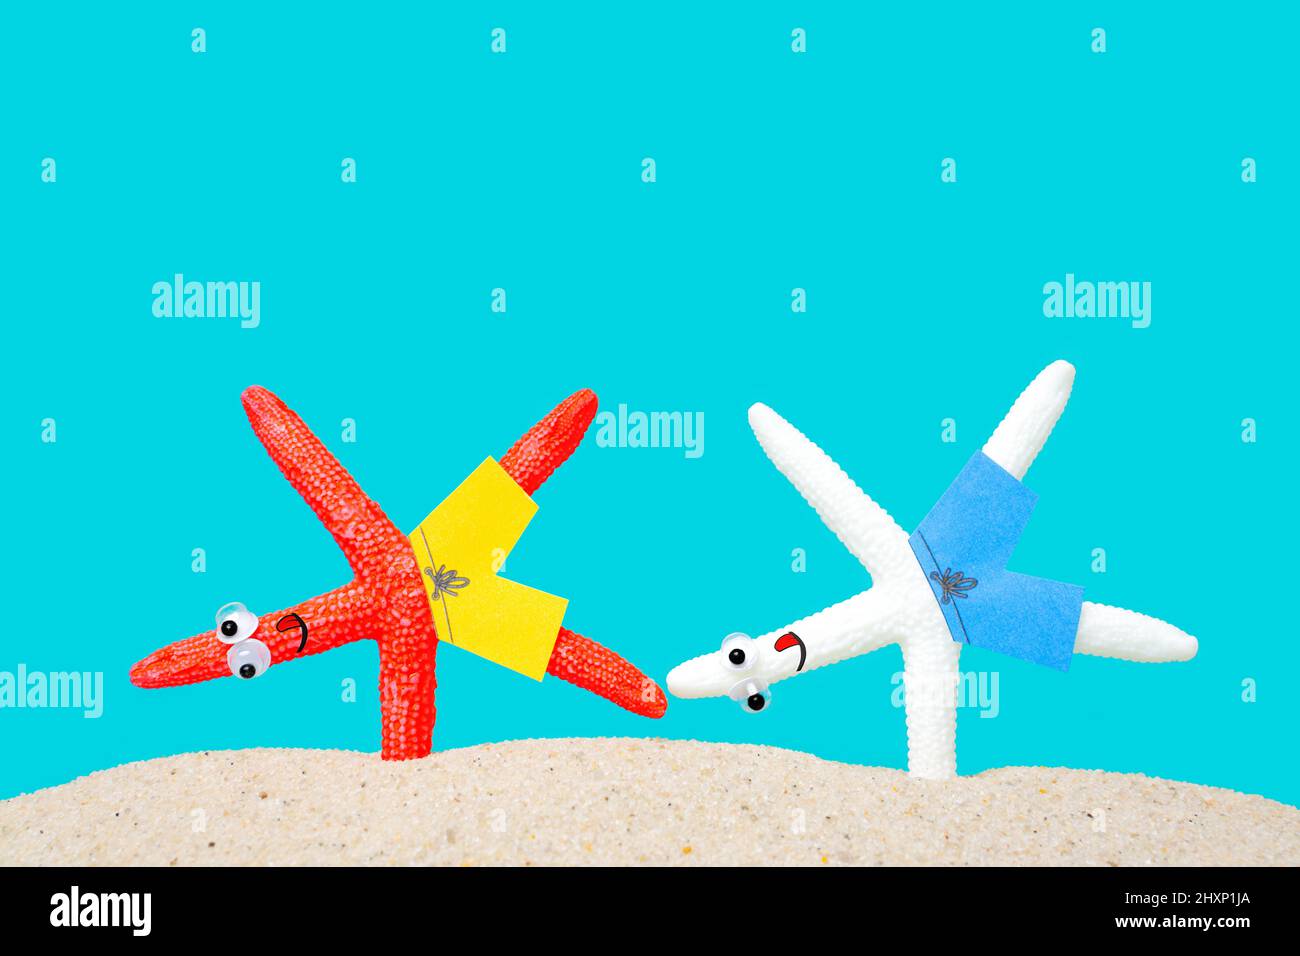 Two starfish characters making the one arm handstand on a sandy beach. Morning seaside yoga session. Stock Photo